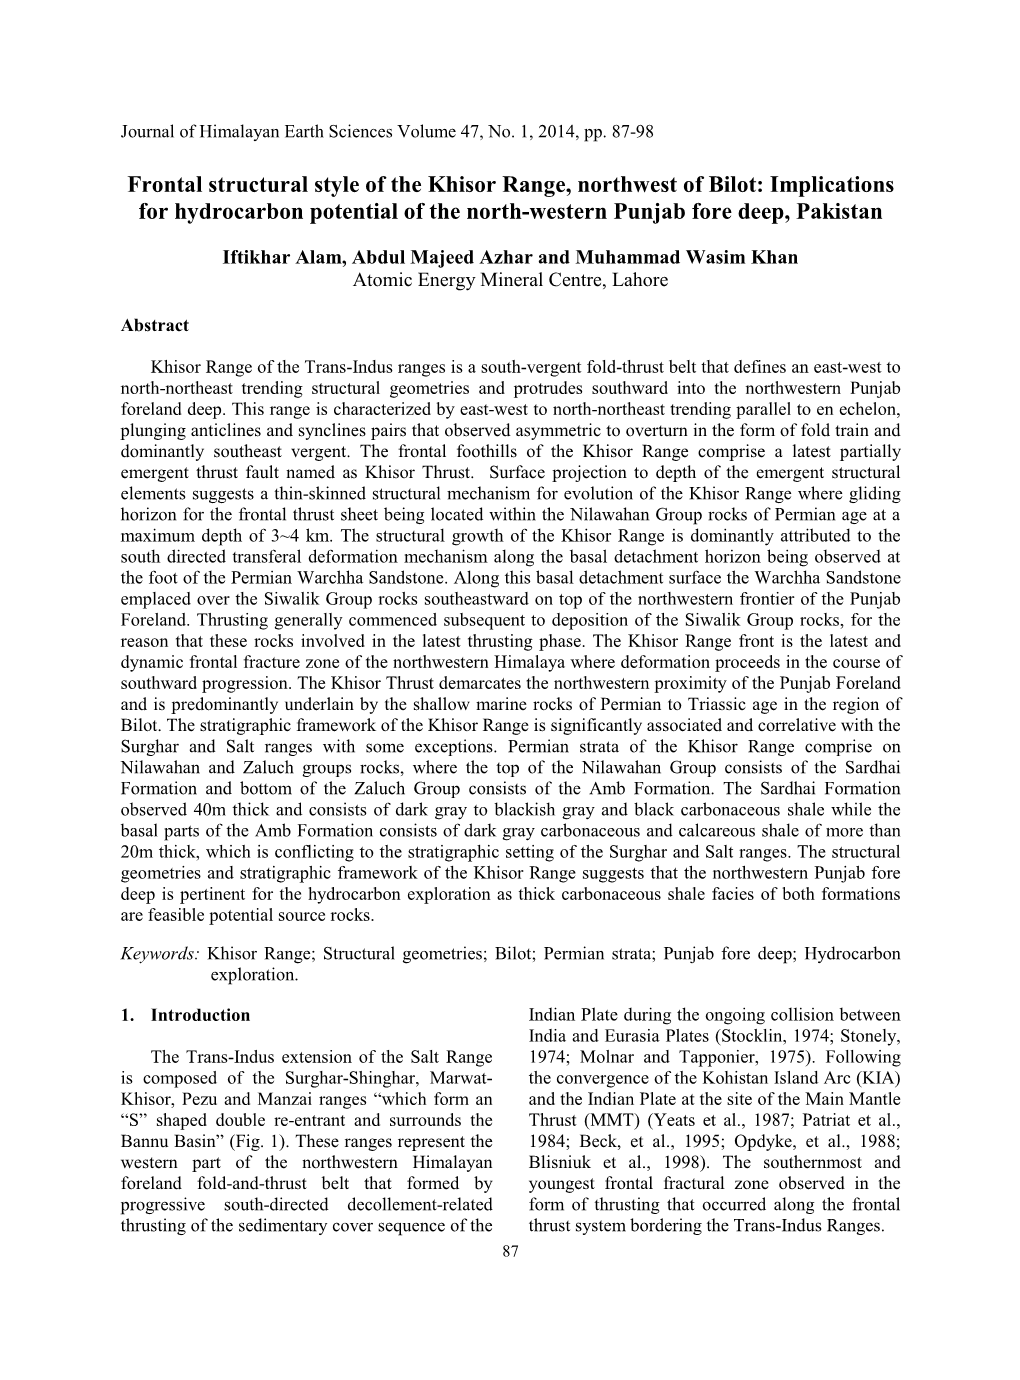 Frontal Structural Style of the Khisor Range, Northwest of Bilot: Implications for Hydrocarbon Potential of the North-Western Punjab Fore Deep, Pakistan